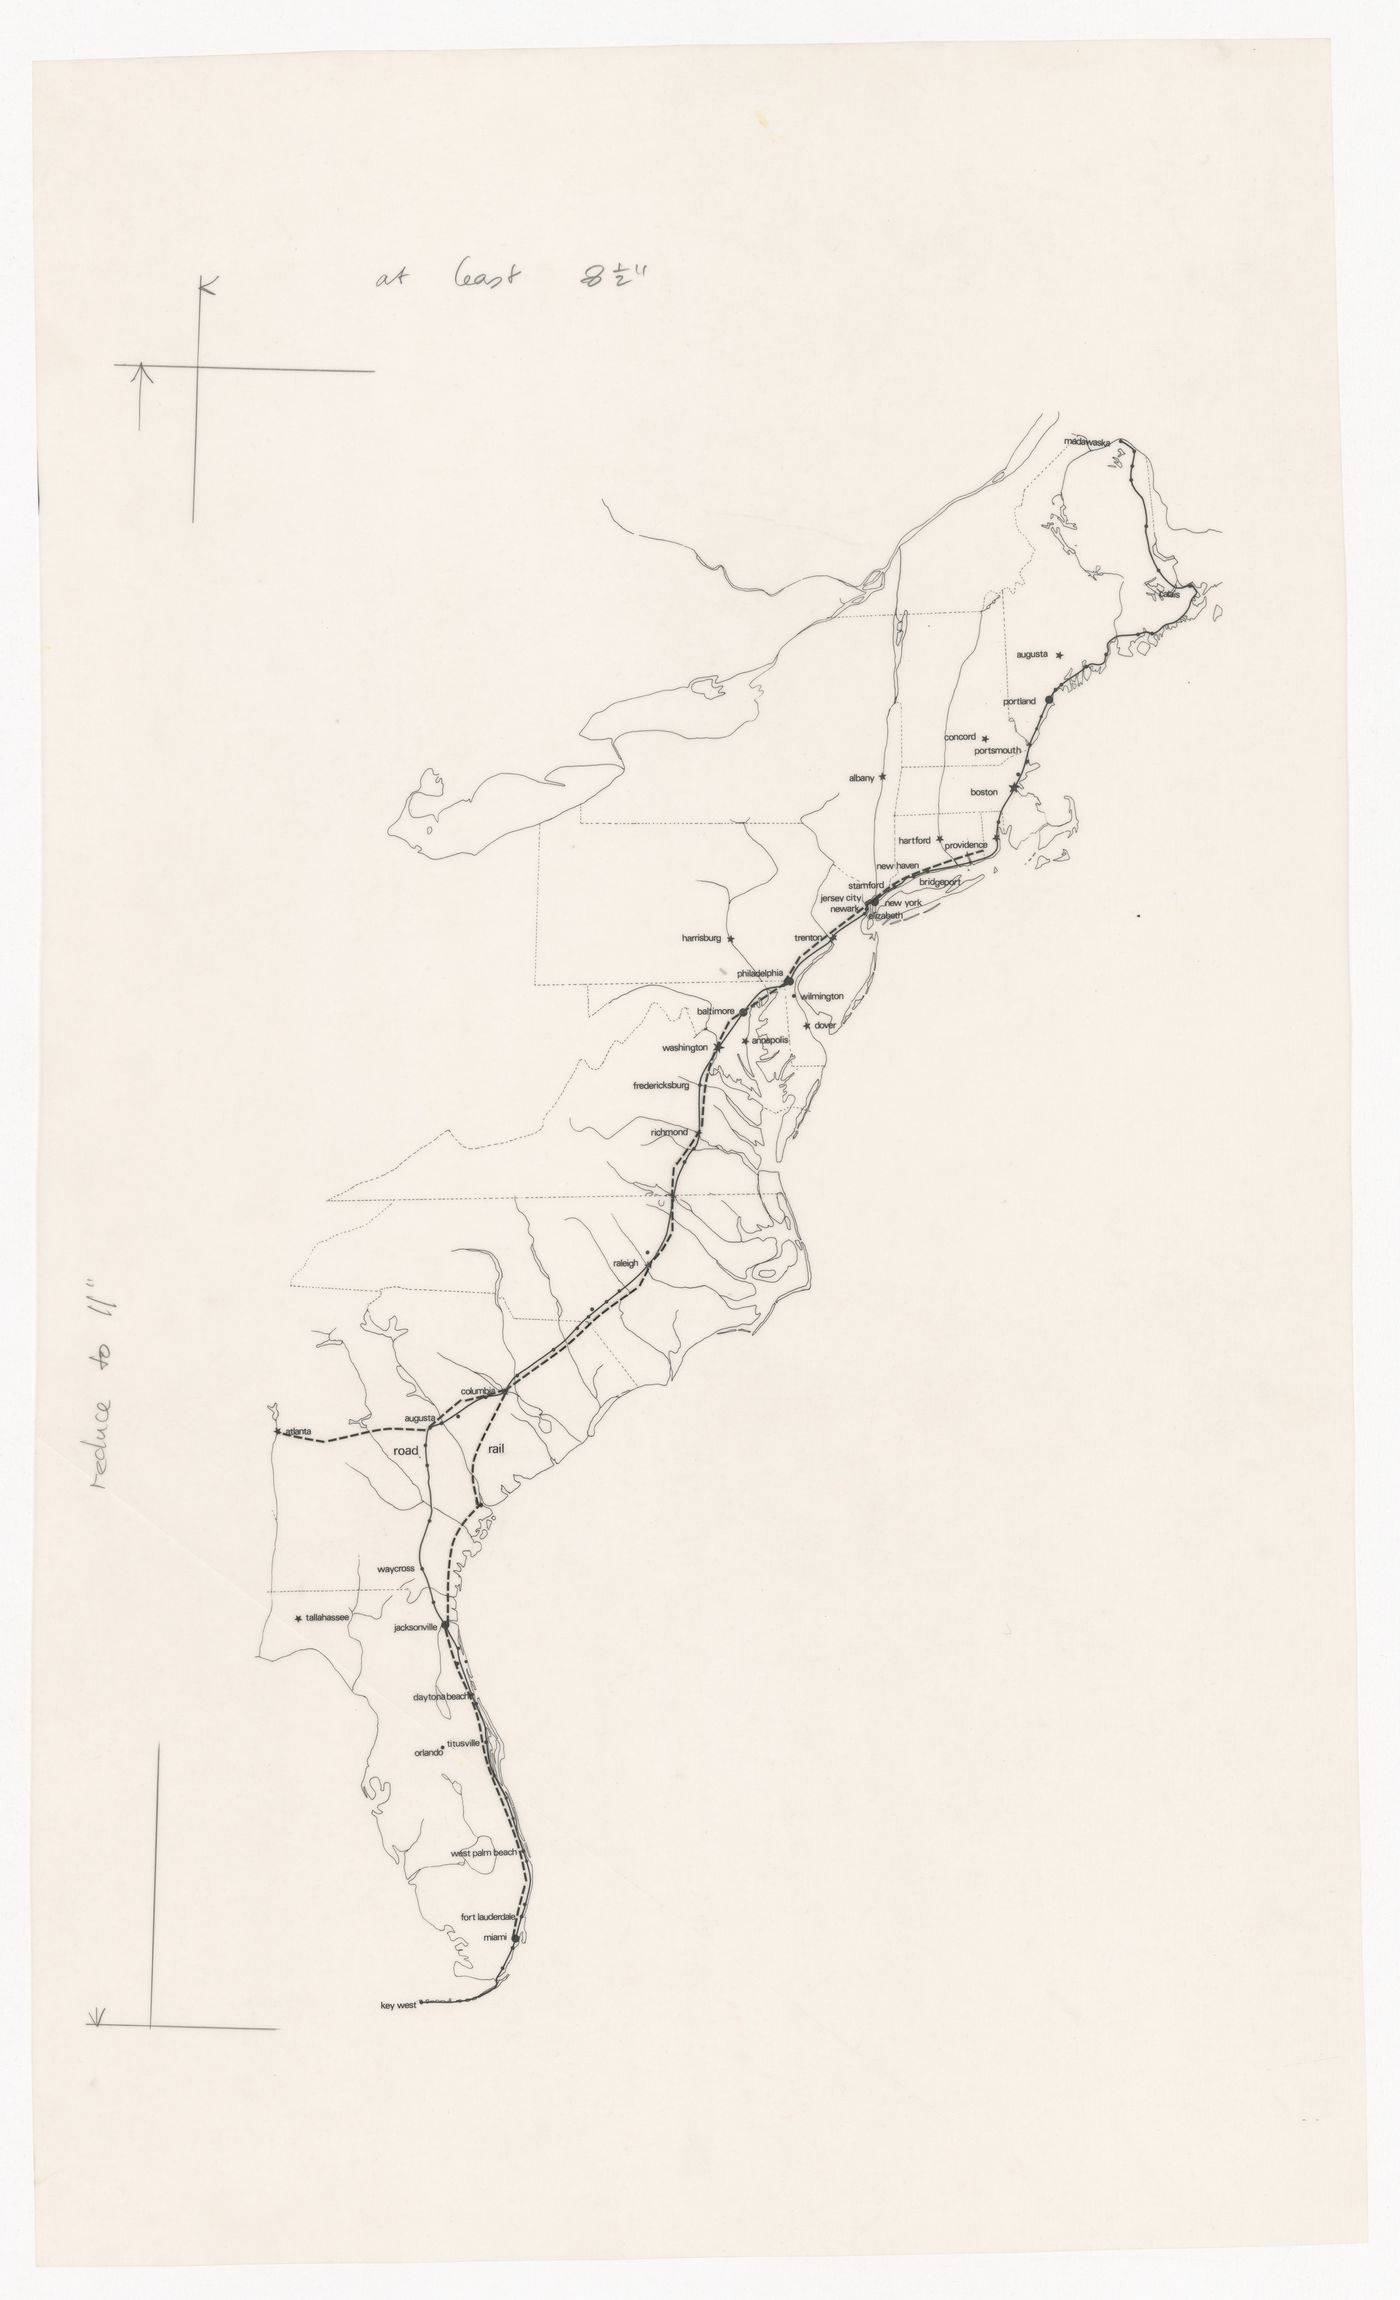 Map of eastern coast of the United States of America with sggested route marked (from the project-file United States One (U.S. 1))